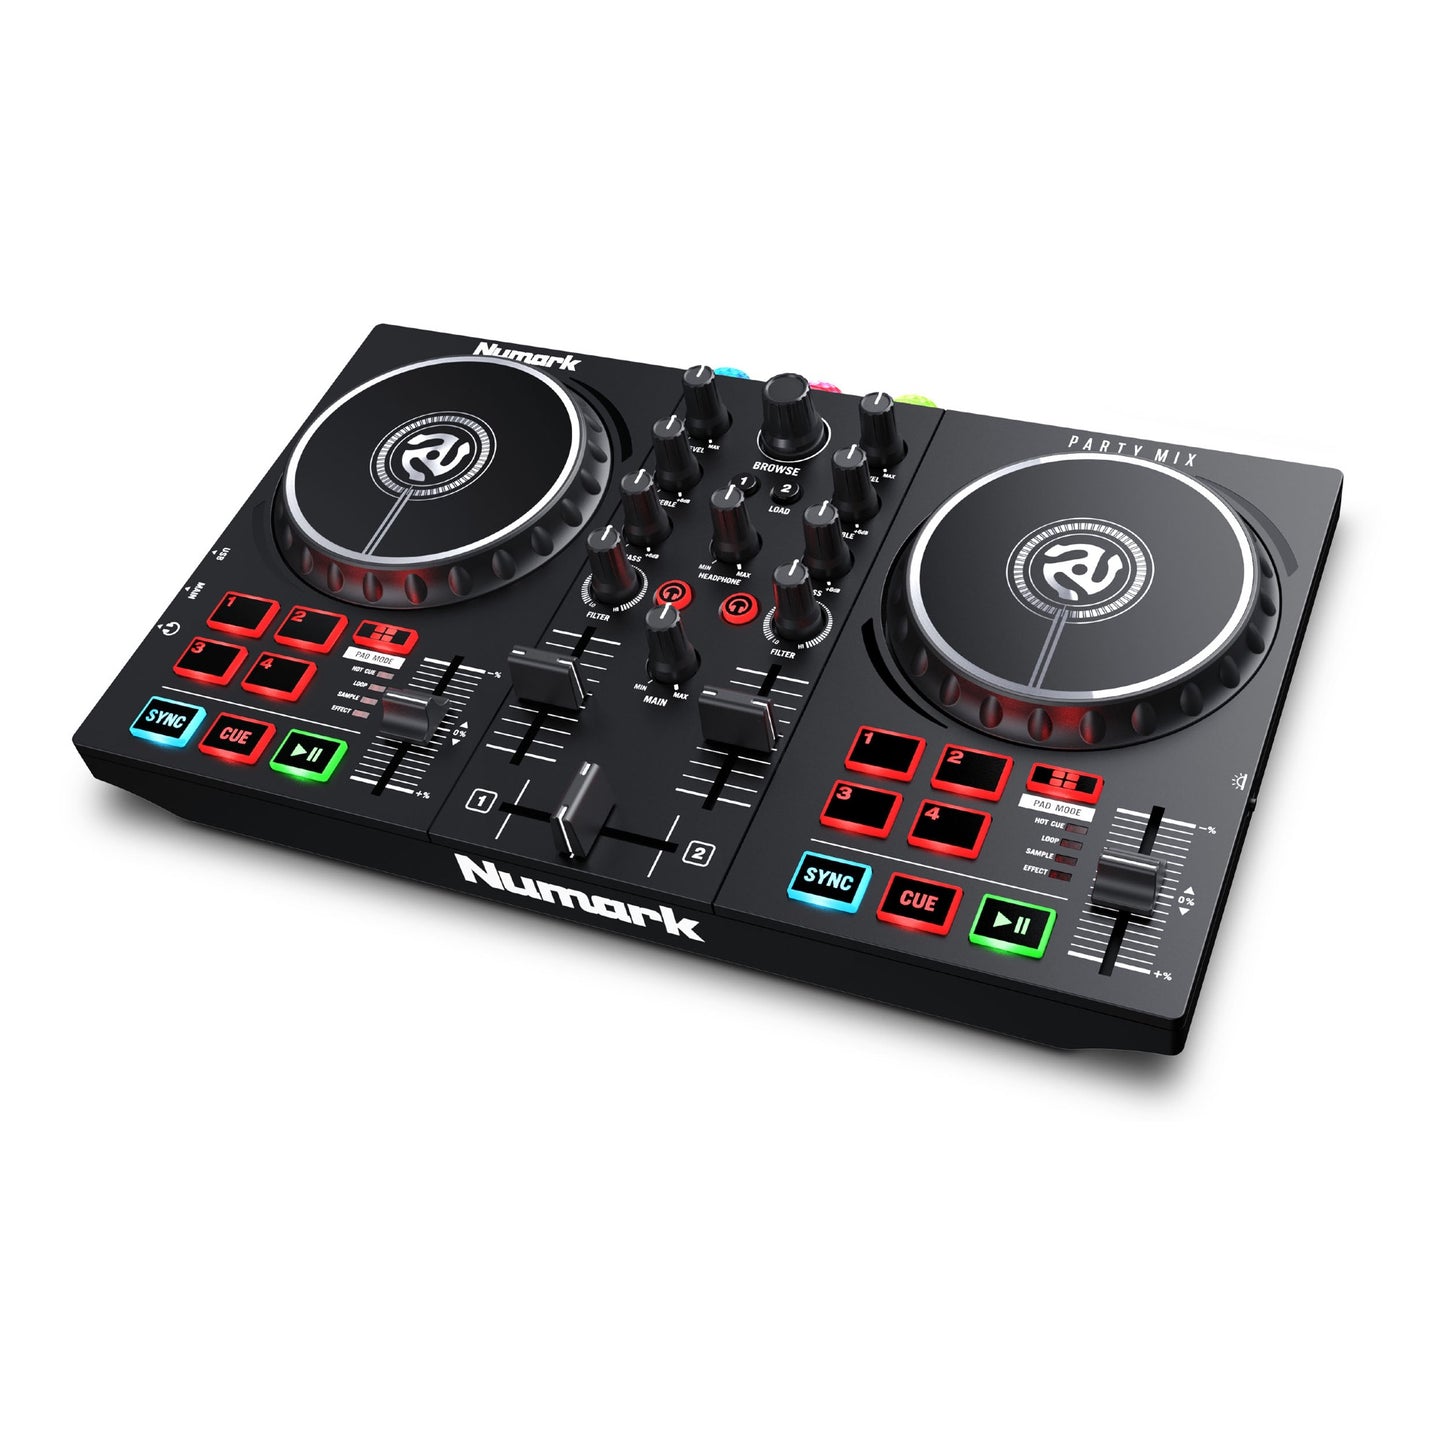 Numark Party Mix II DJ Controller with Built in Light Show